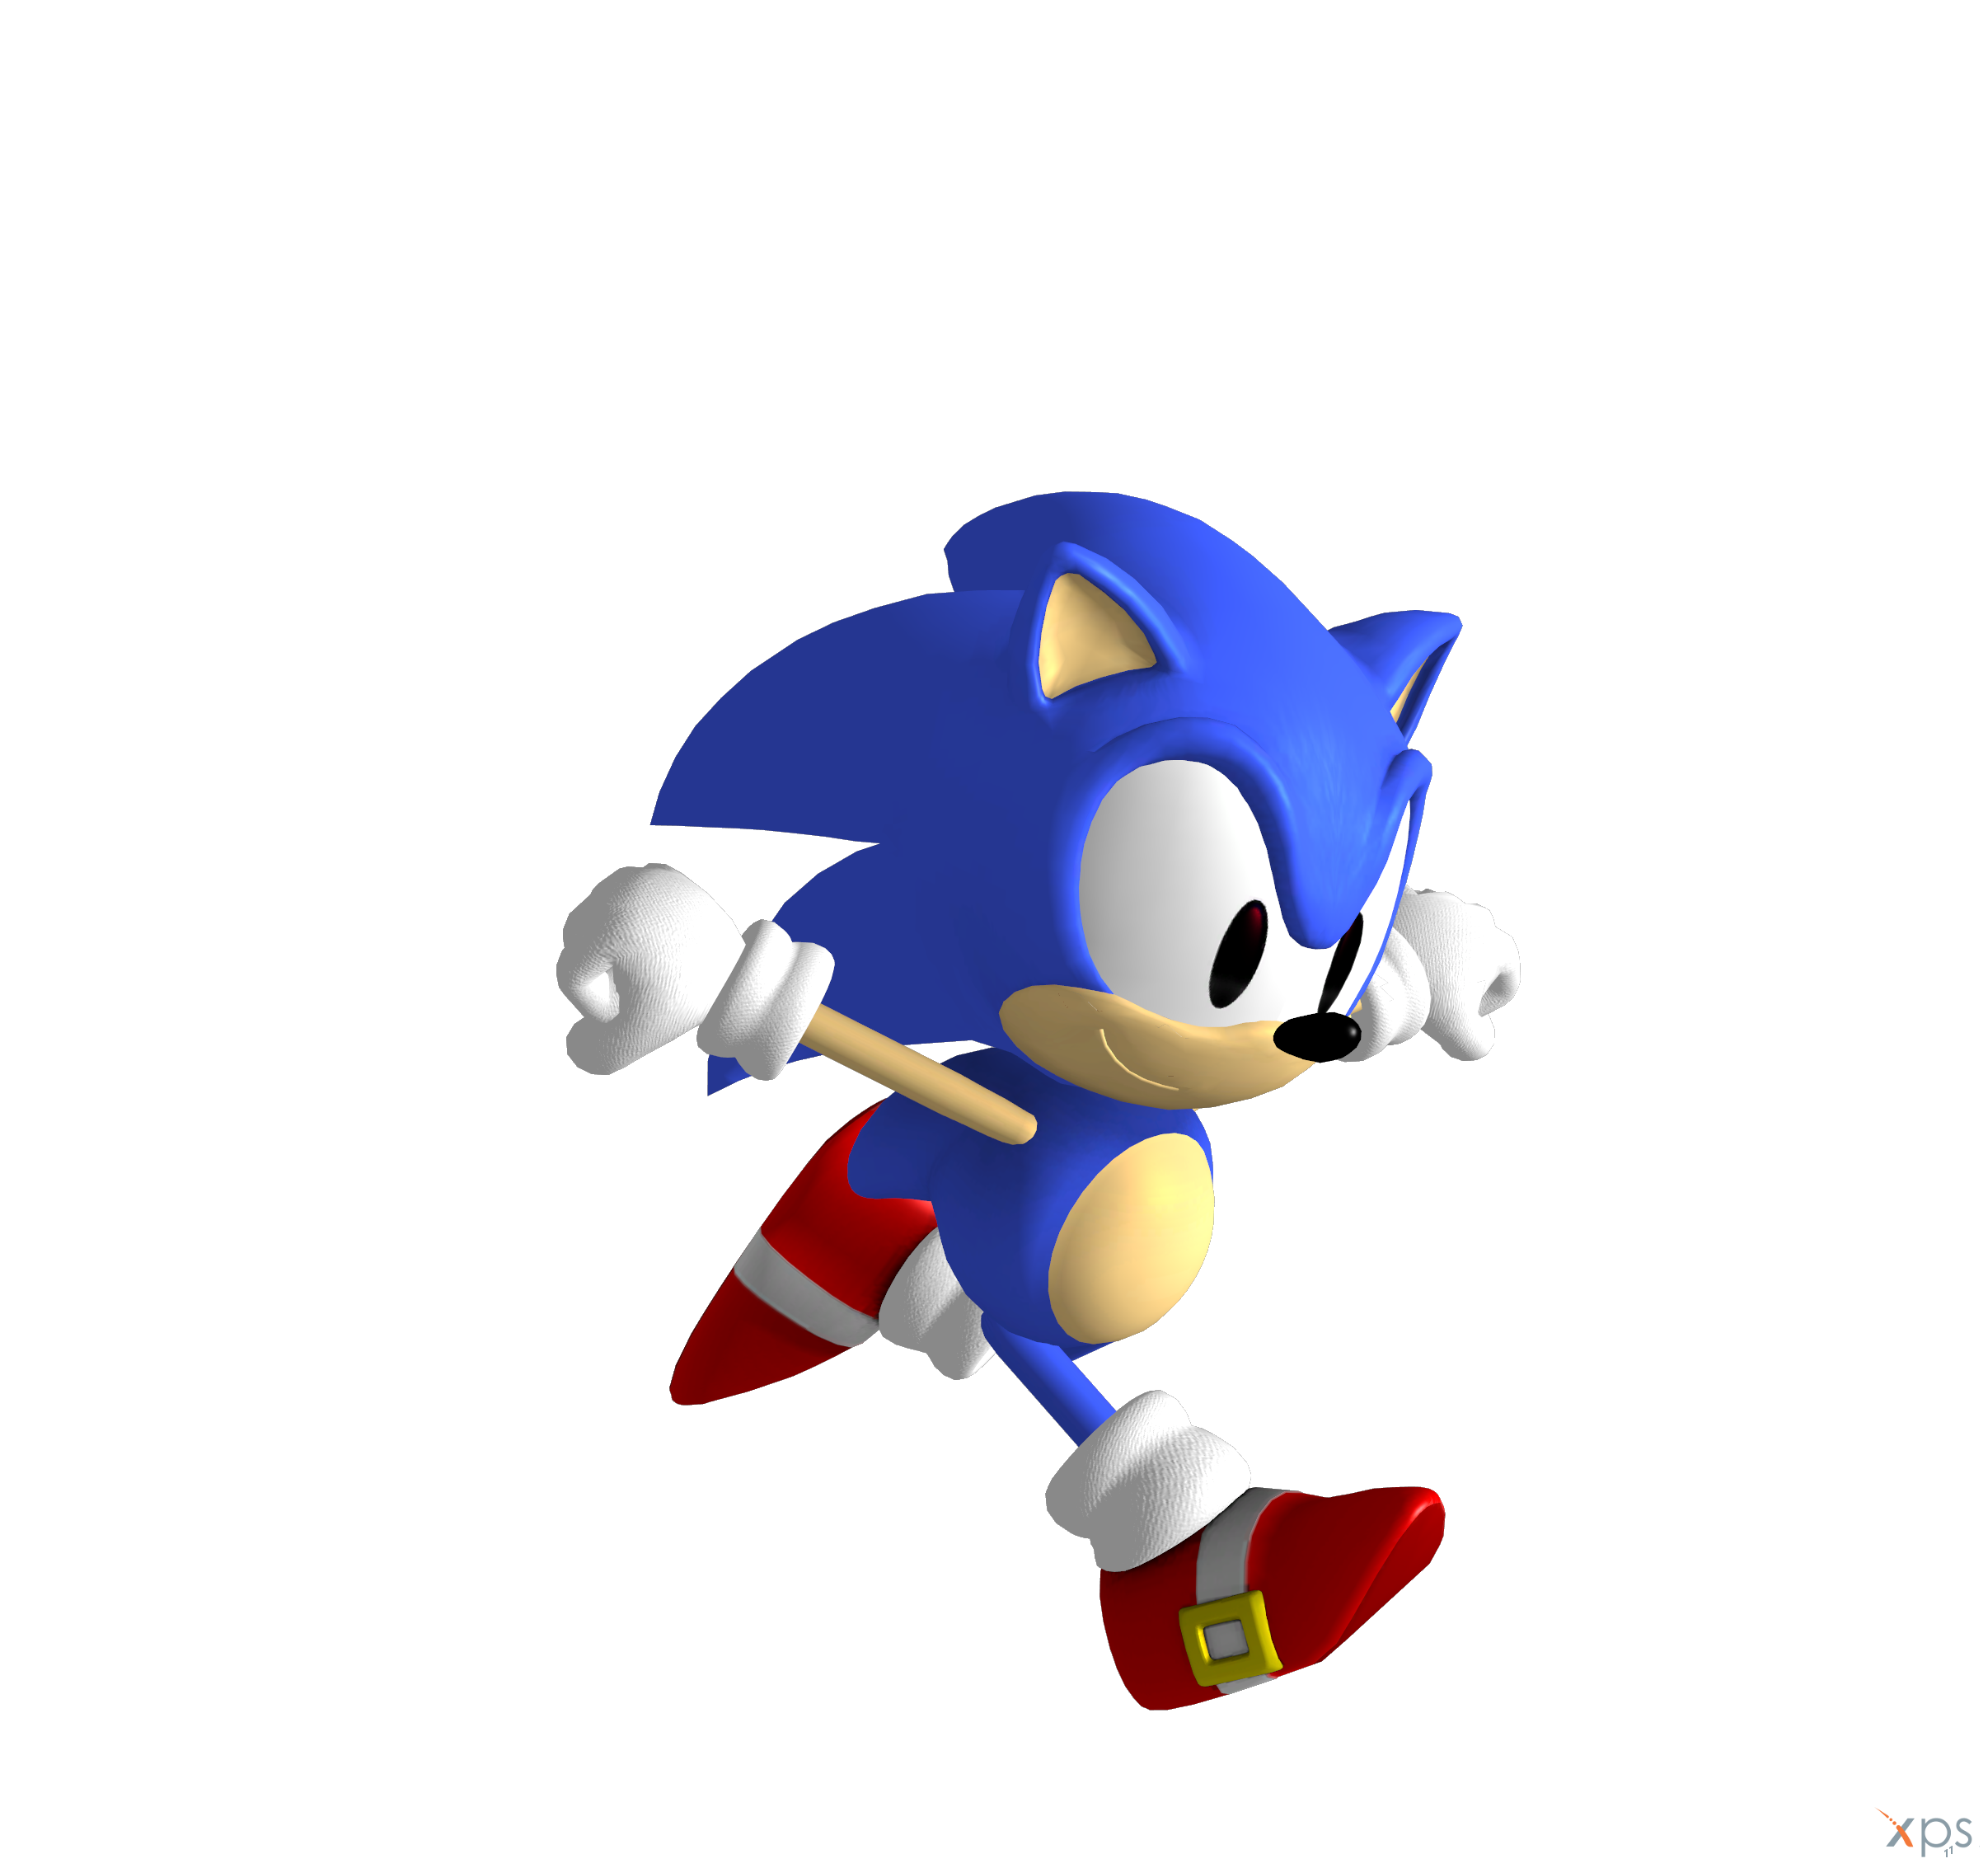 Sonic the Hedgehog - Textures + DOWNLOAD by Detexki99 on DeviantArt